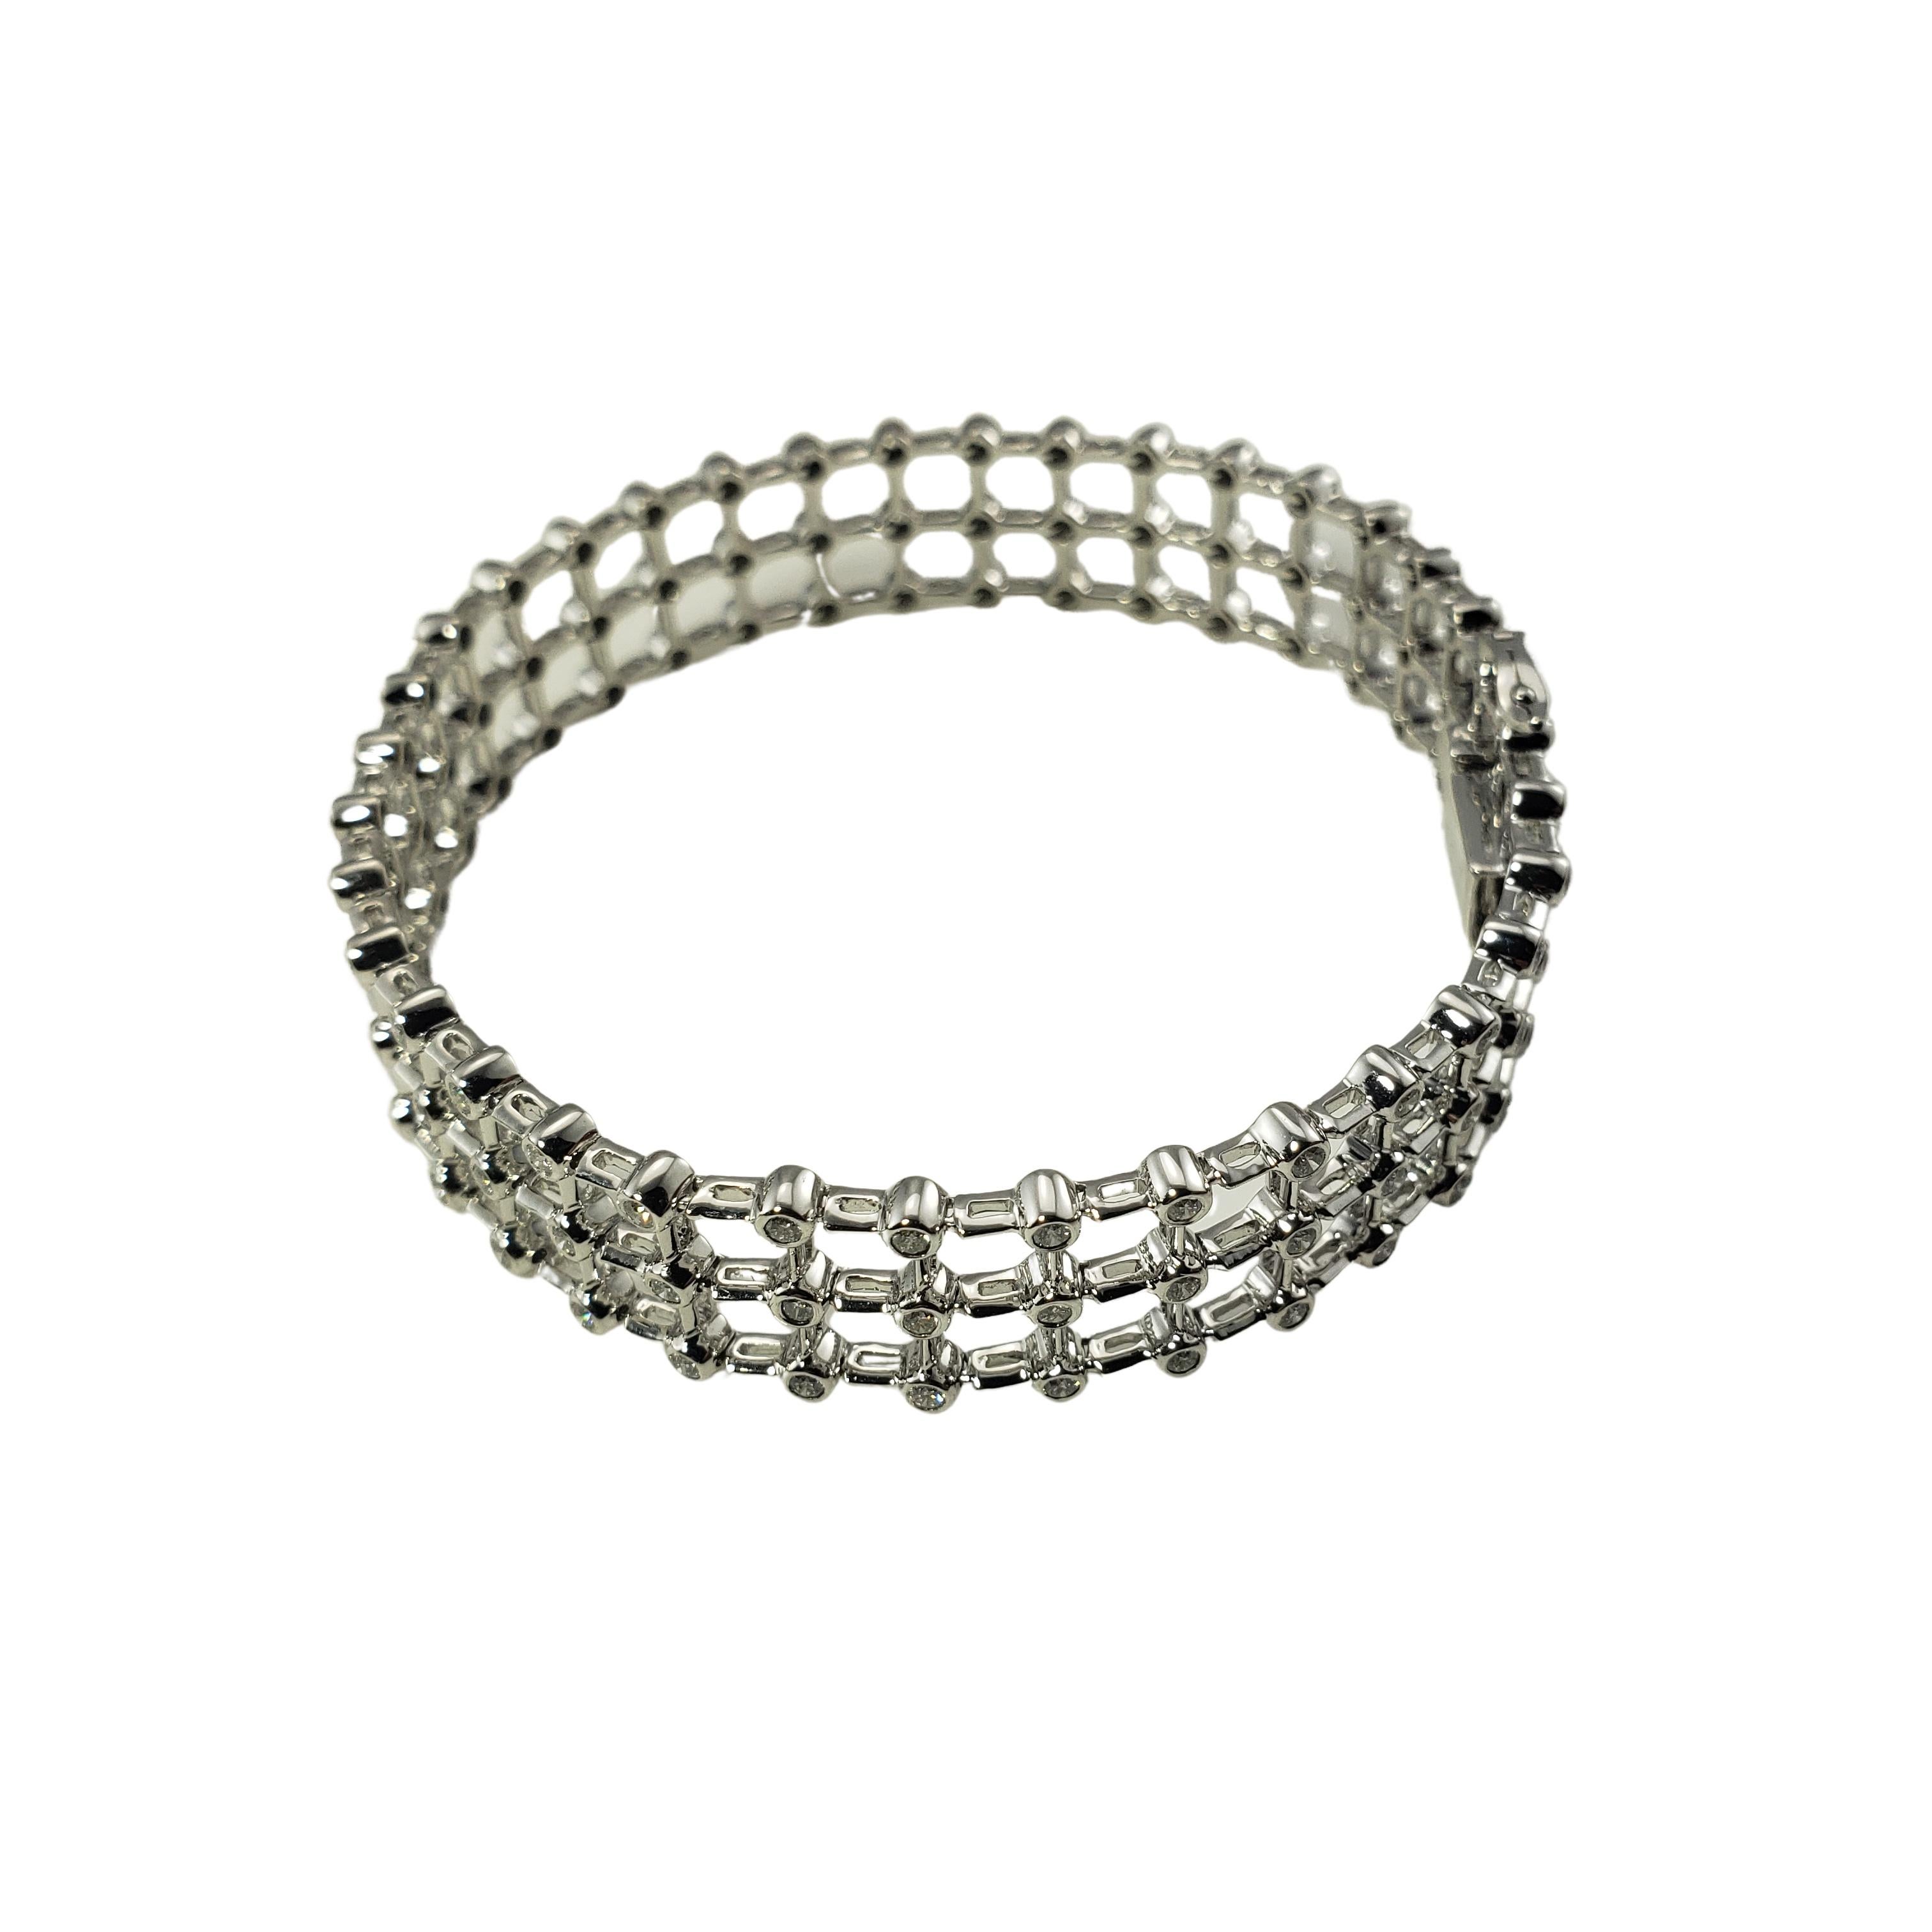 18 Karat White Gold and Diamond Bracelet-

This spectacular sparkling bracelet features 108 round brilliant cut diamonds set in beautifully detailed 18K white gold.  Width:  12 mm.

Approximate total diamond weight:   1.88 ct.

Diamond color: 